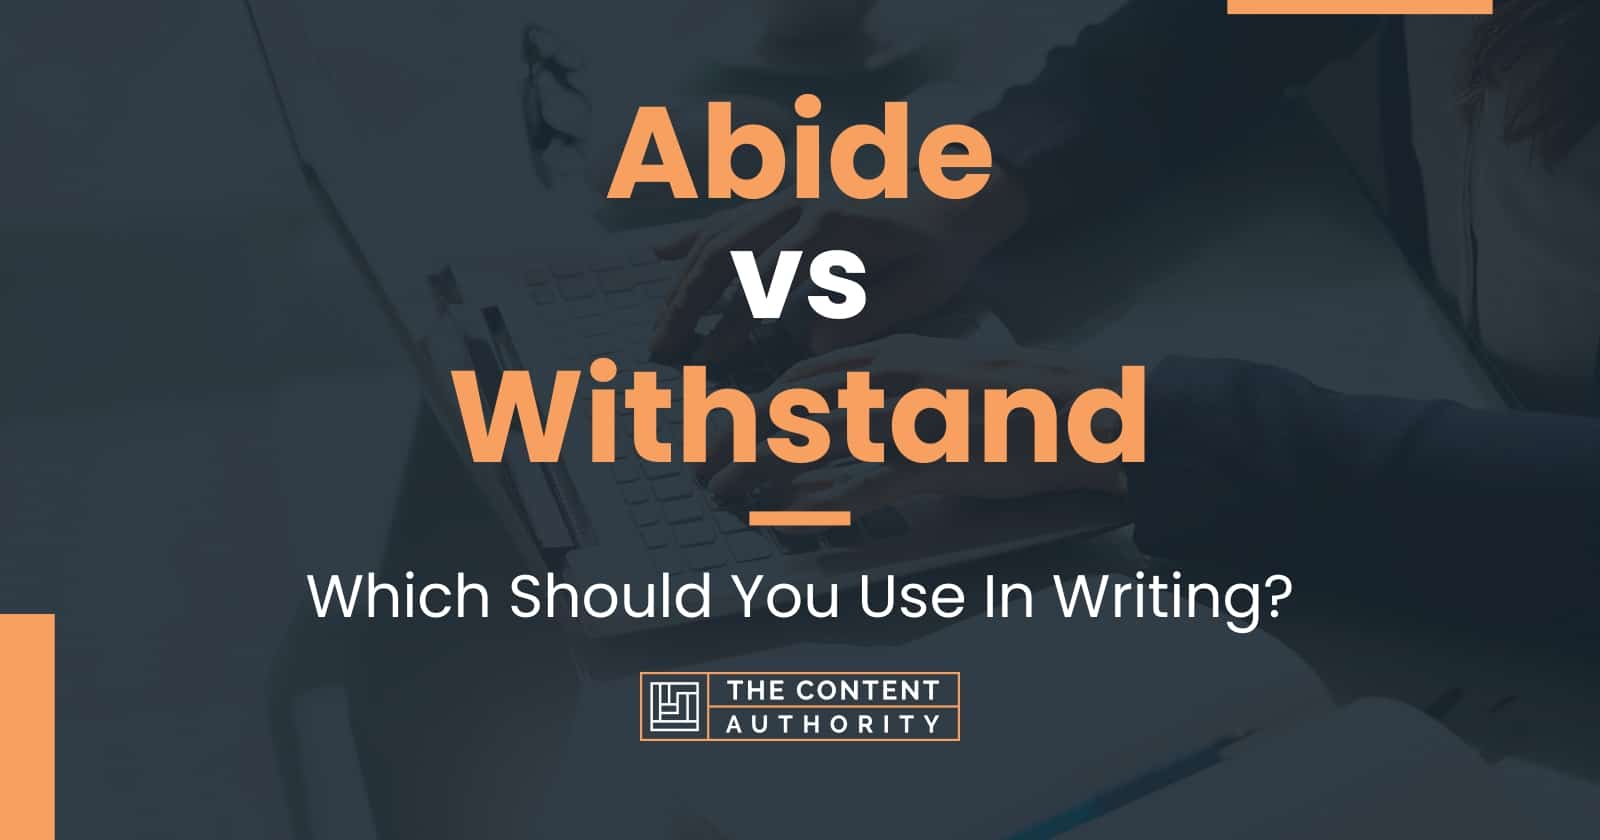 Abide vs Withstand: Which Should You Use In Writing?